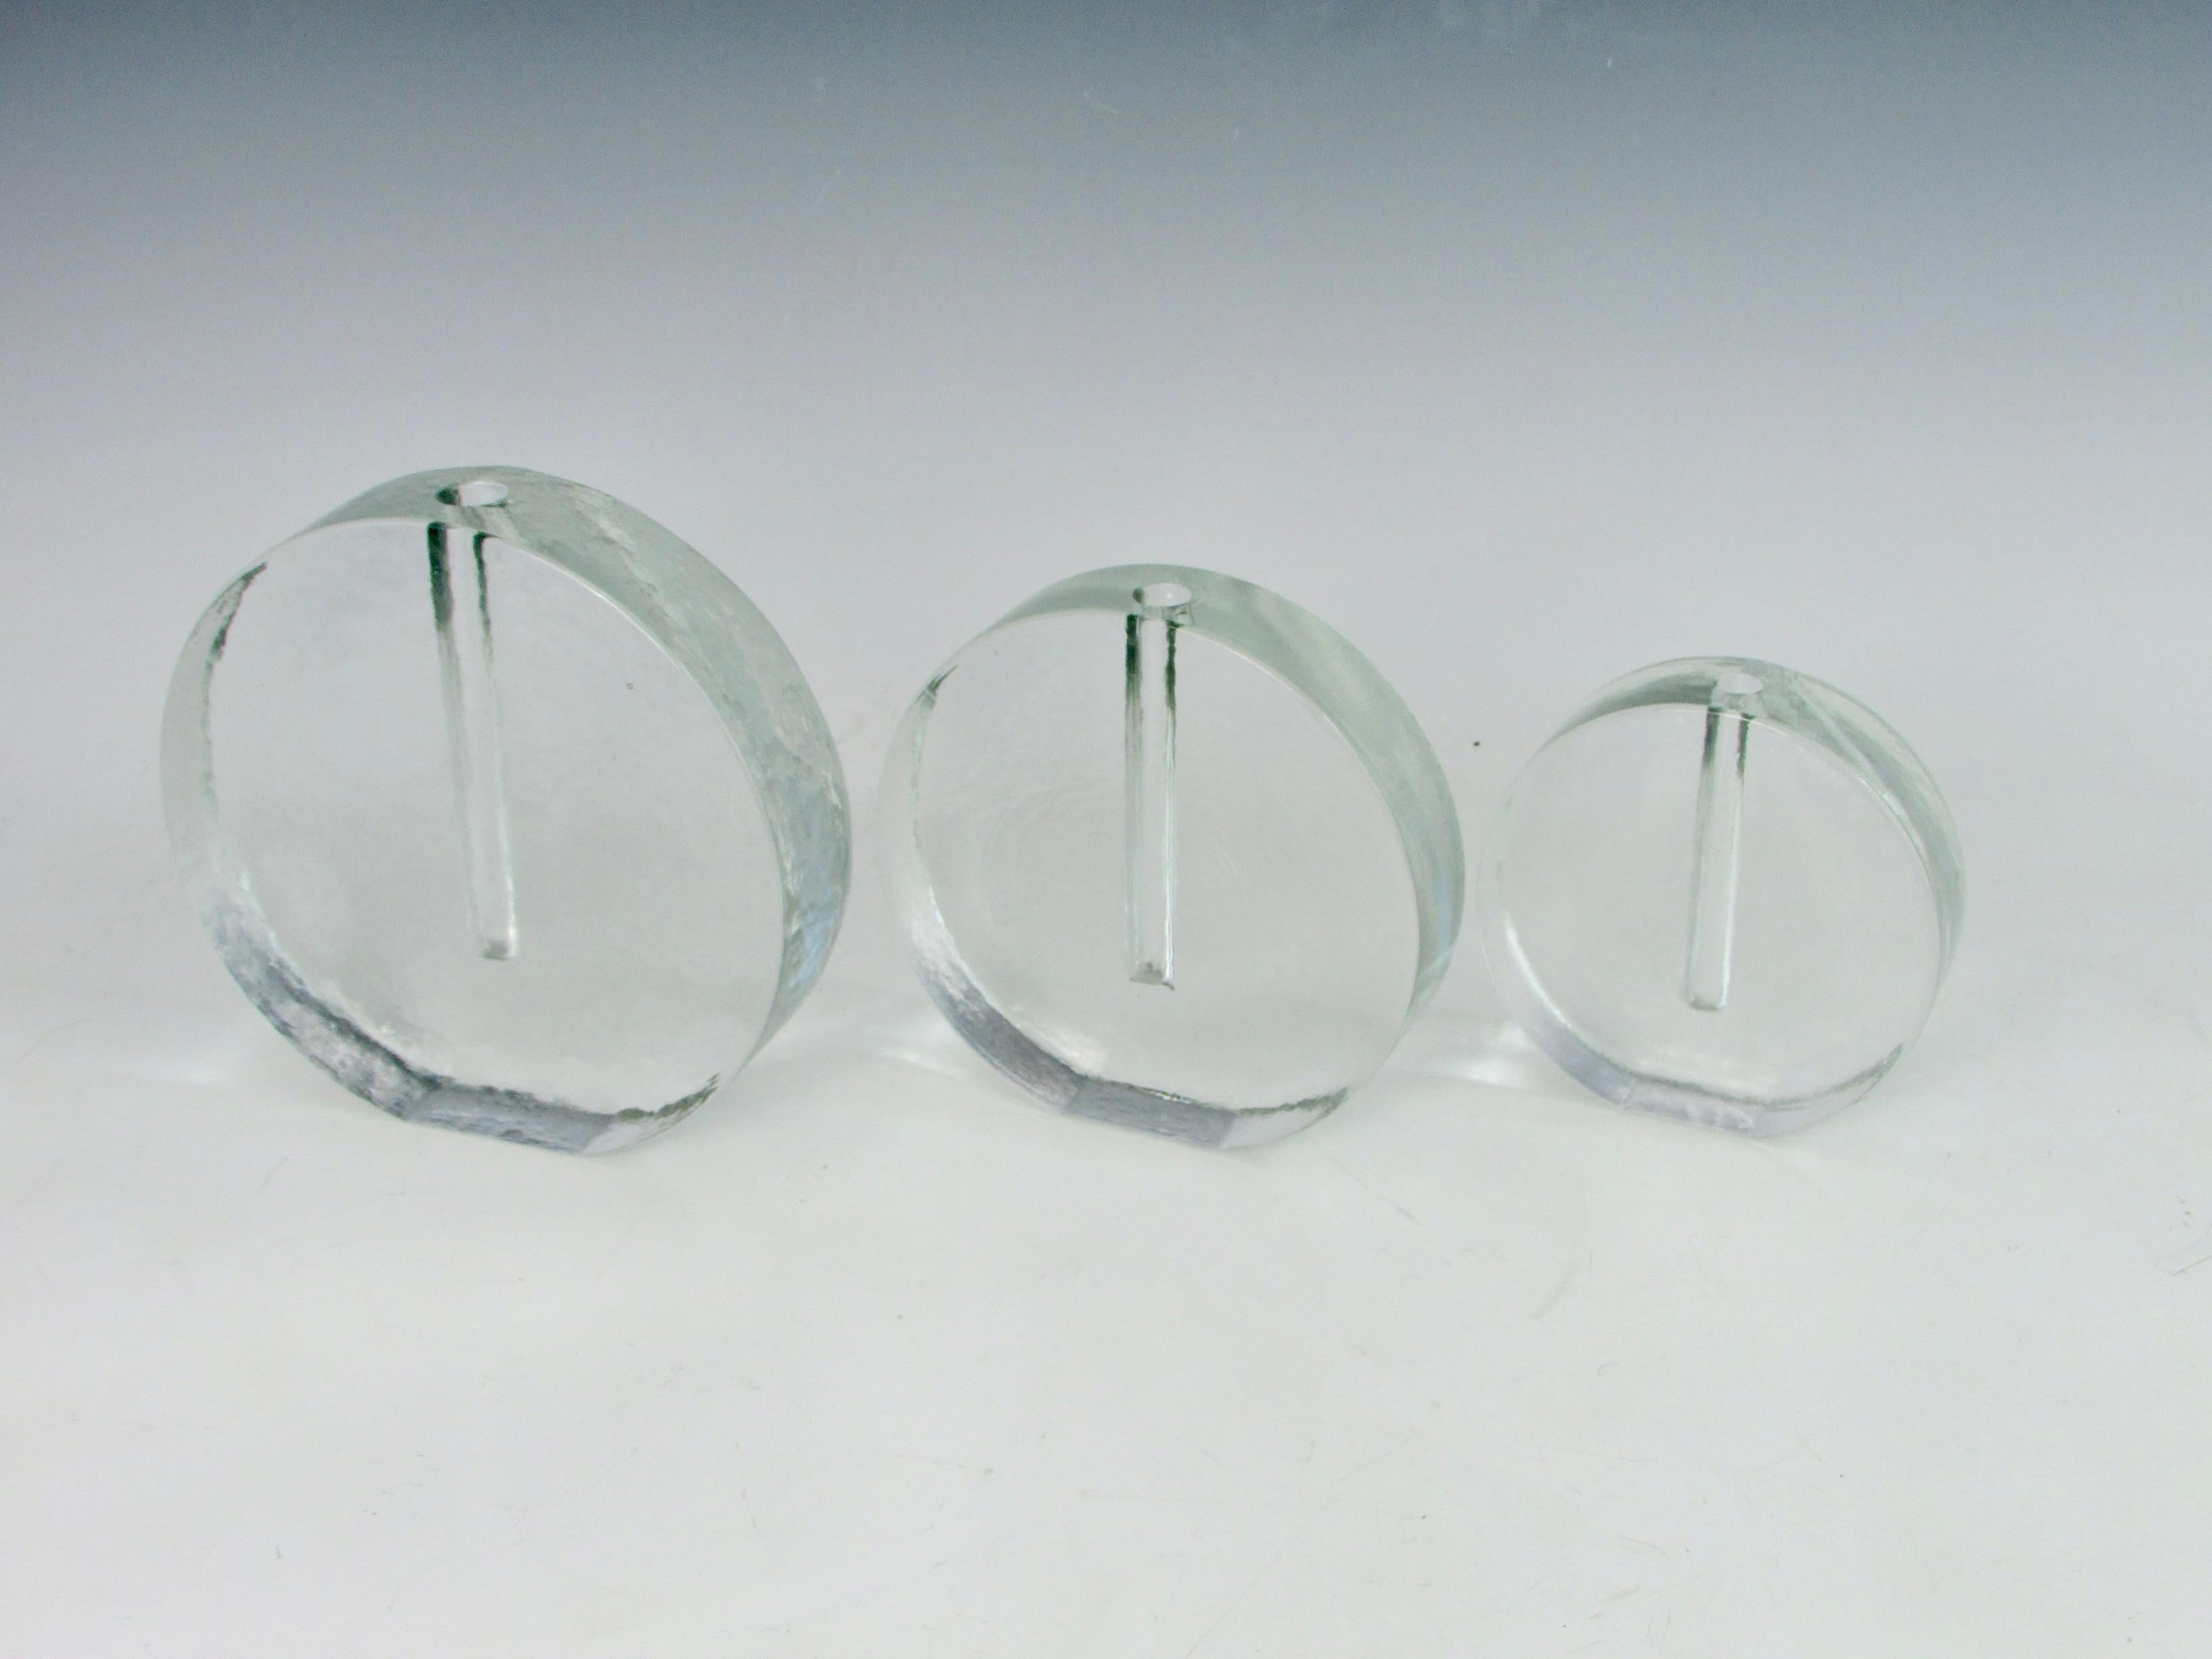 Set of three graduated height circular glass bud vases. Solid cast glass in frosty Ice texture. Attributed to Tapio Wirkkala for Littala of Finland. Measures: Smallest 5